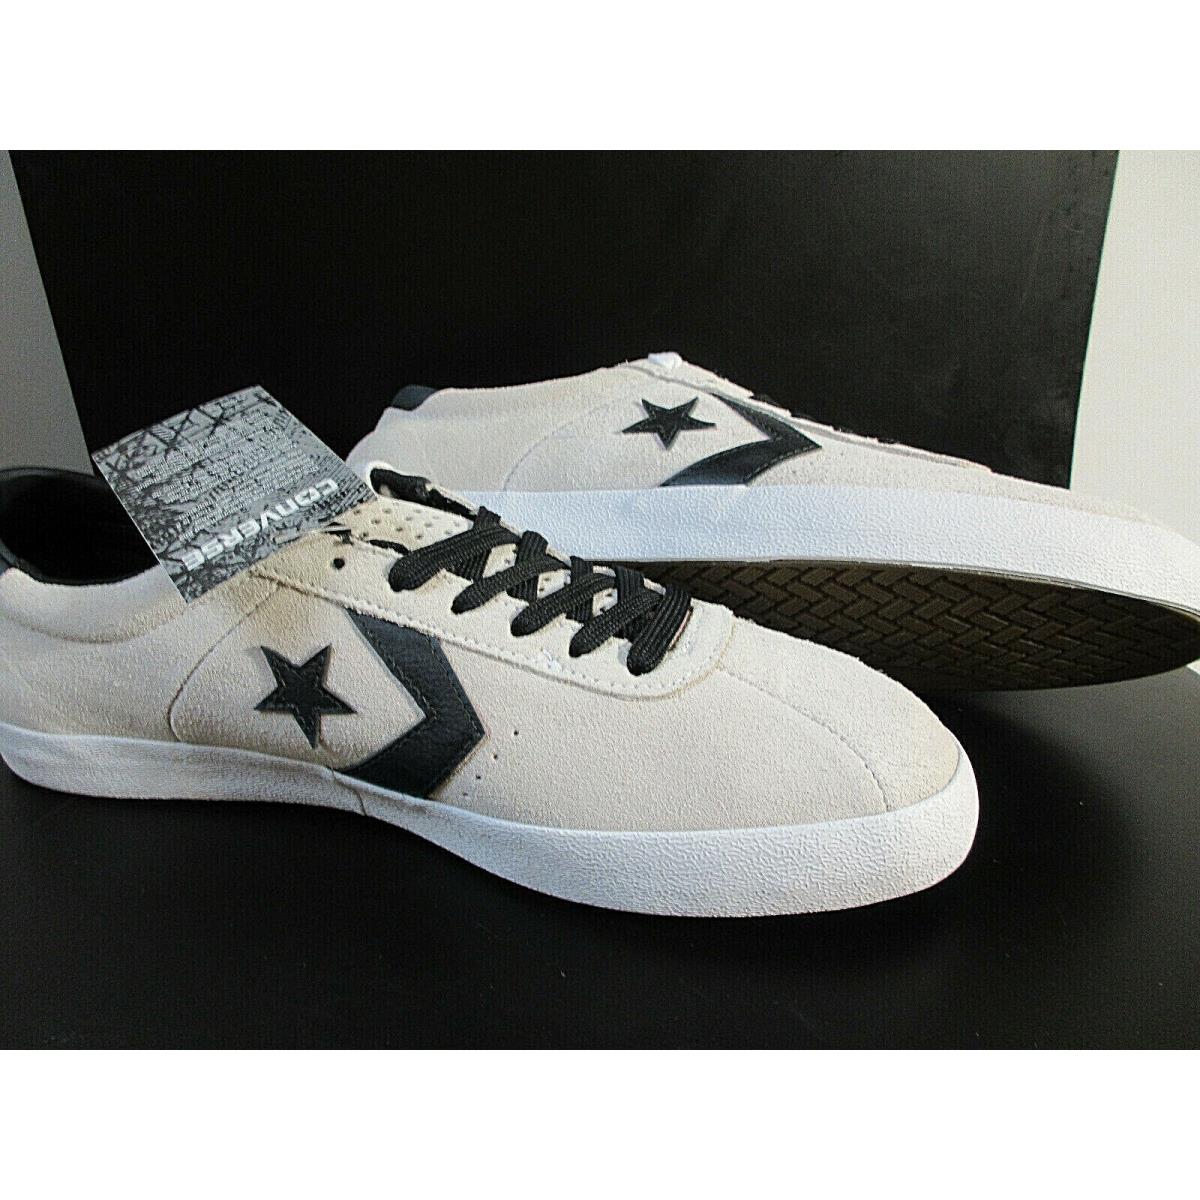 Converse Breakpoint Pro Ox`-white/black Soft Leather 10 11 12 13 155540C